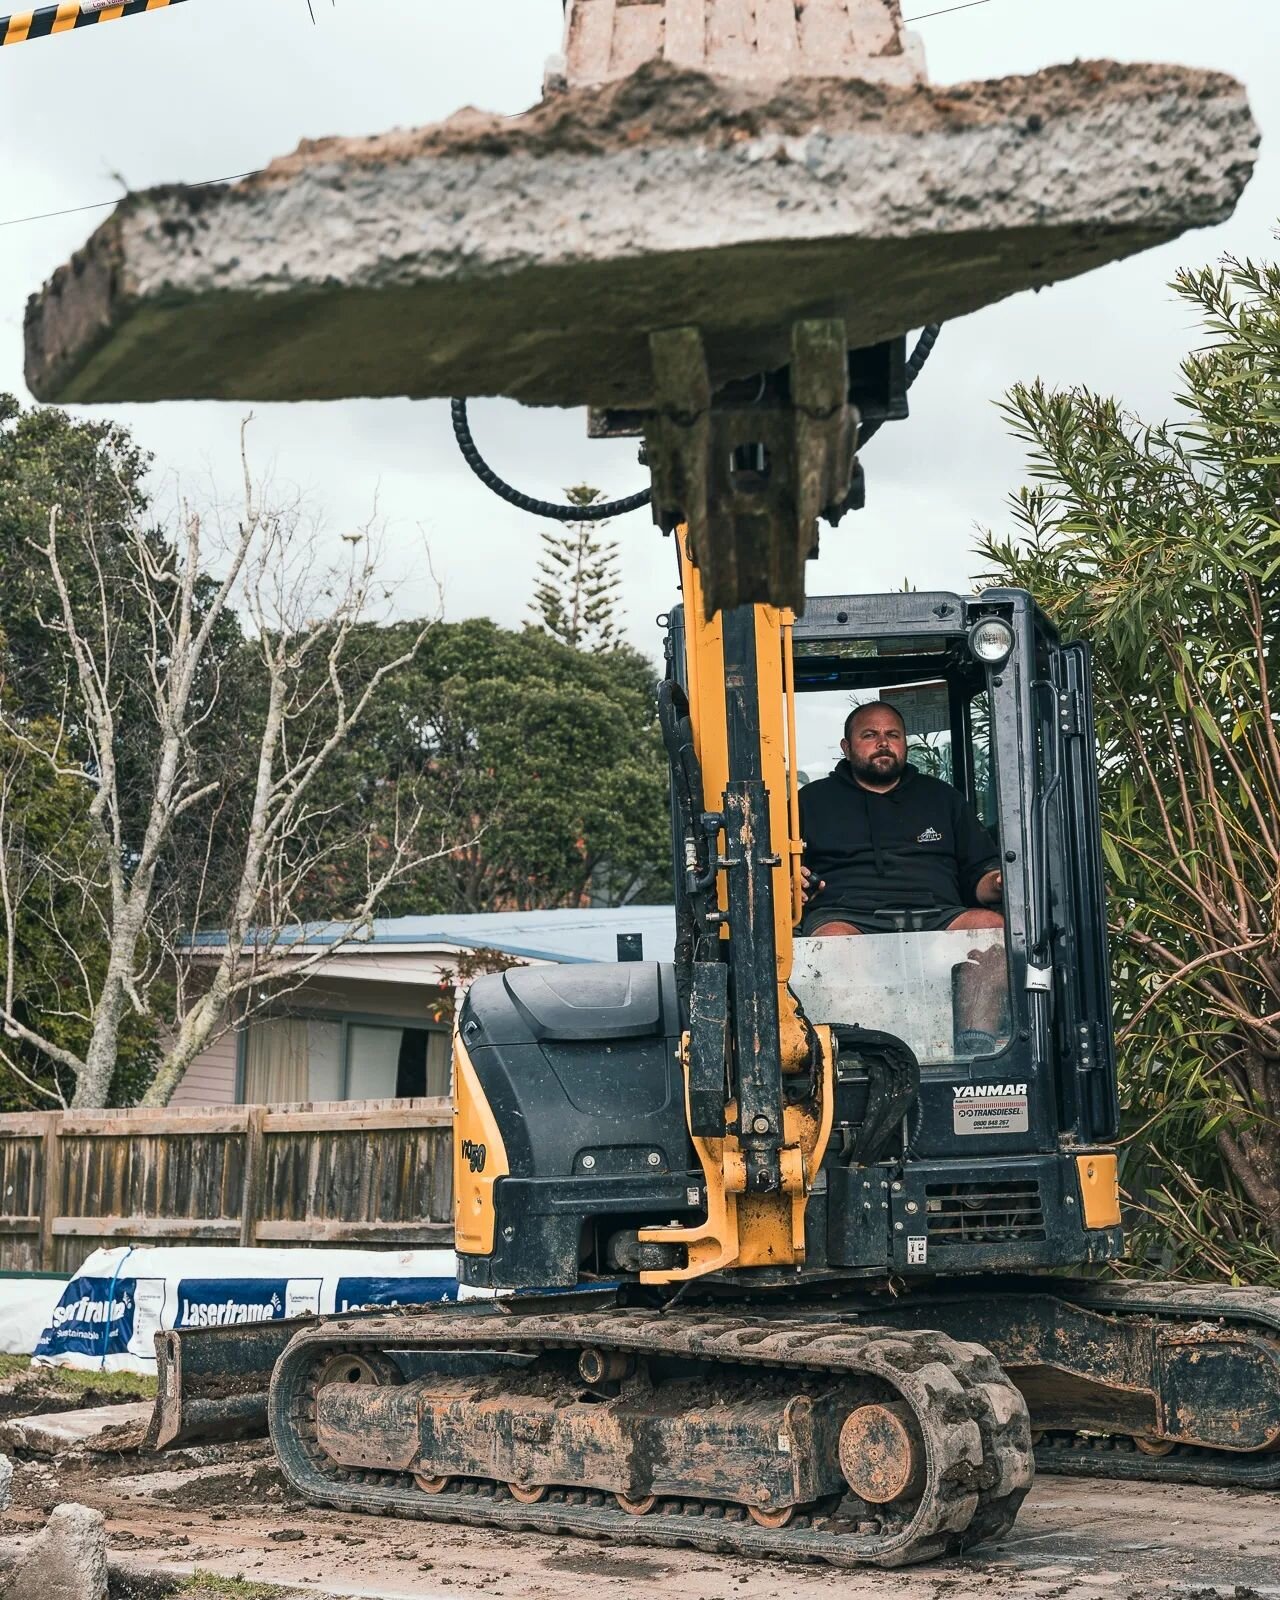 Nathan breaks up an old driveway out near gulf harbour for a new garage to take its place.

You always need to be surgical when placing the large concrete chunks in the rear of the truck or else you could cause some serious damage which wouldn't go d